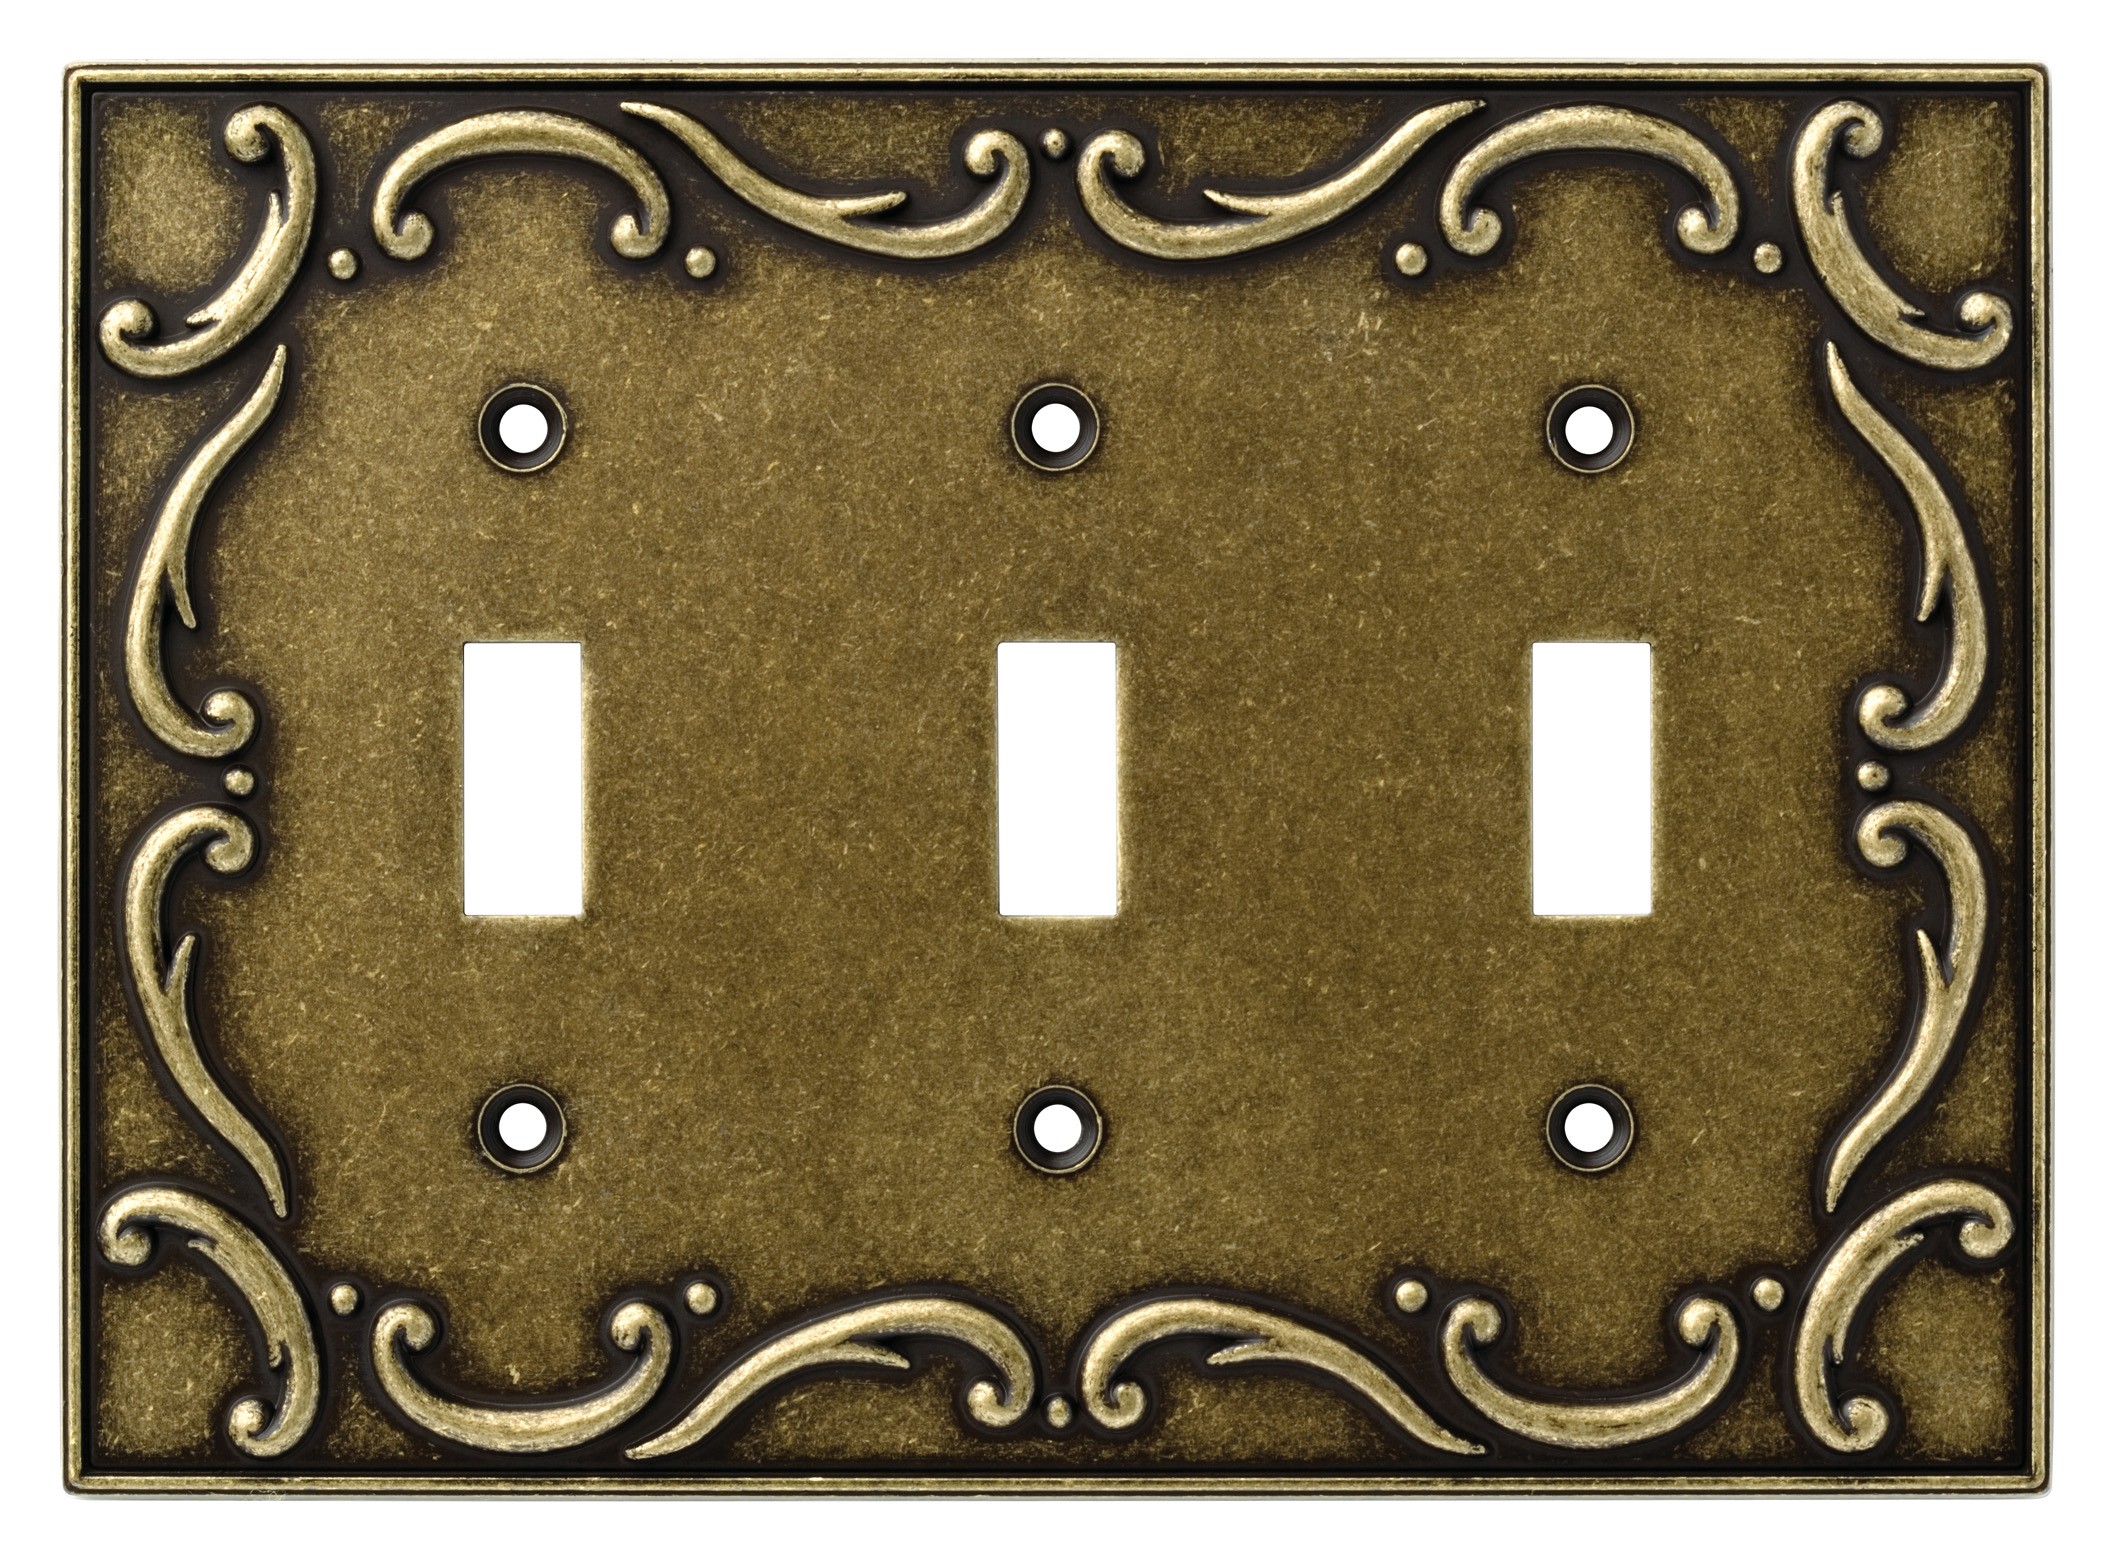 Liberty Hardware 126350, Triple Switch Wall Plate, Burnished Antique Brass, French Lace